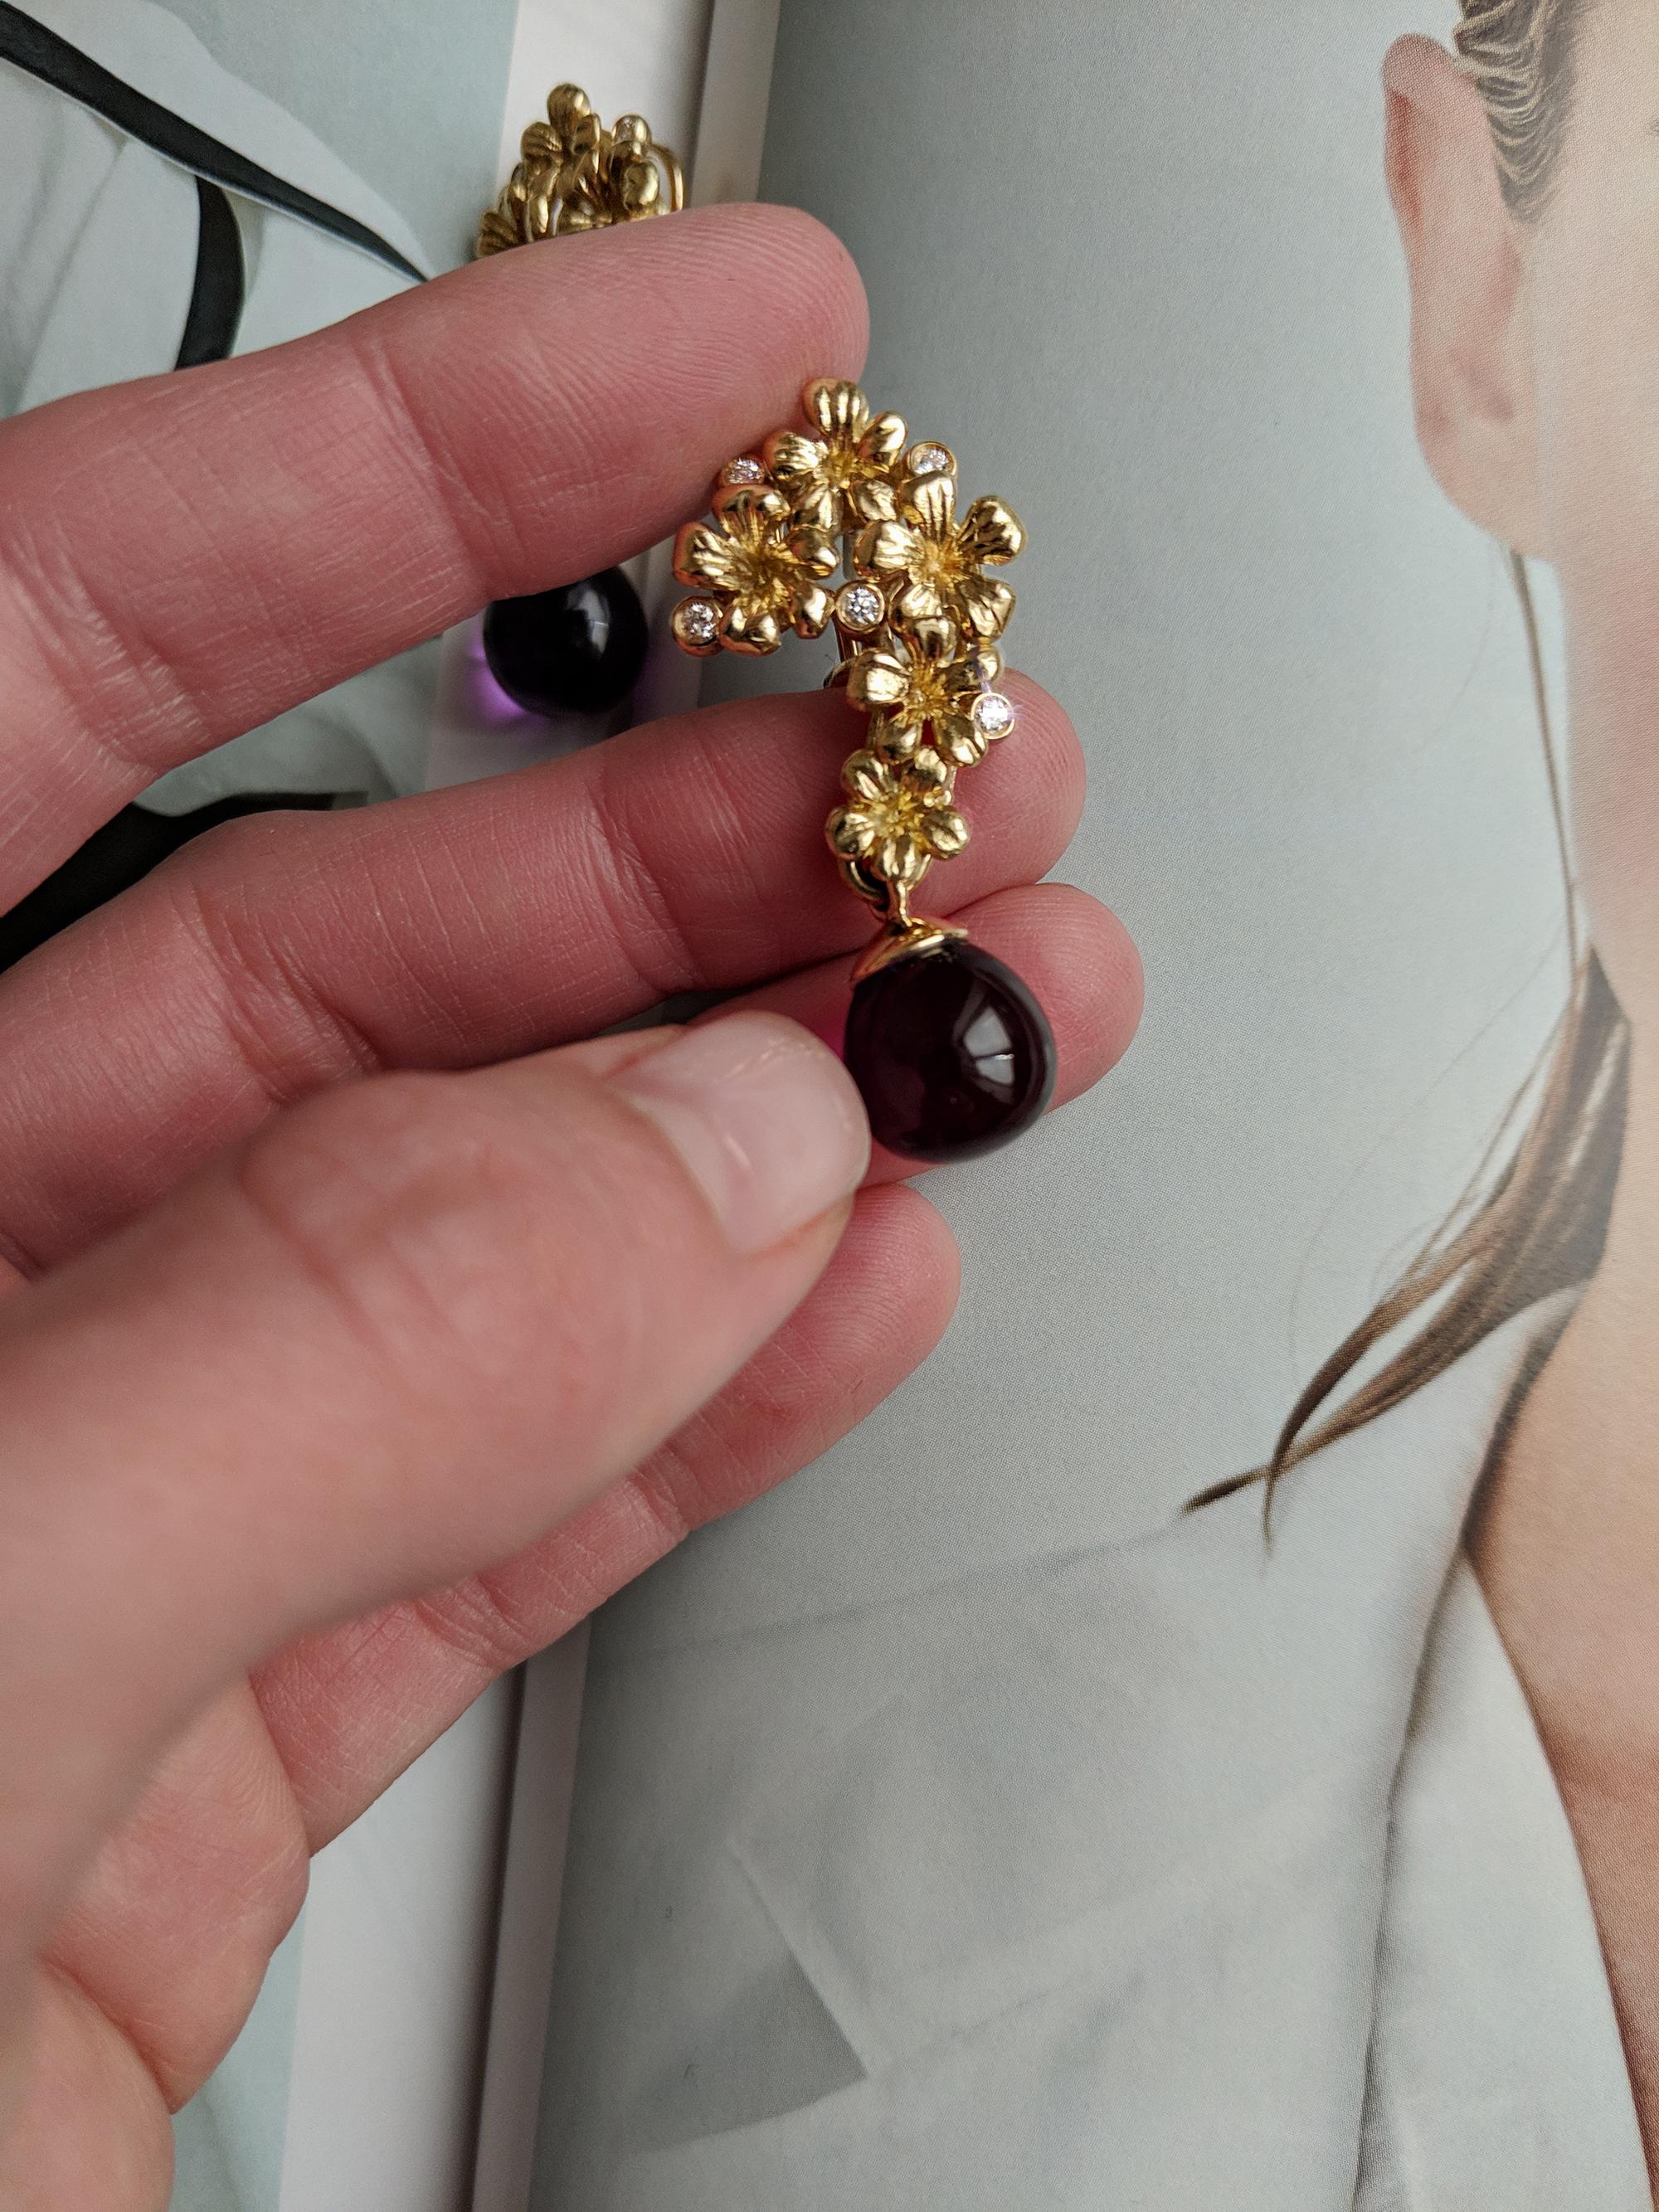 This Plum Blossom brooch in 18 karat yellow gold with detachable amethyst is encrusted with five round diamonds and has been featured in Vogue UA reviews. The cabochon amethyst is removable and exchangeable for other stone drops. We use top-quality